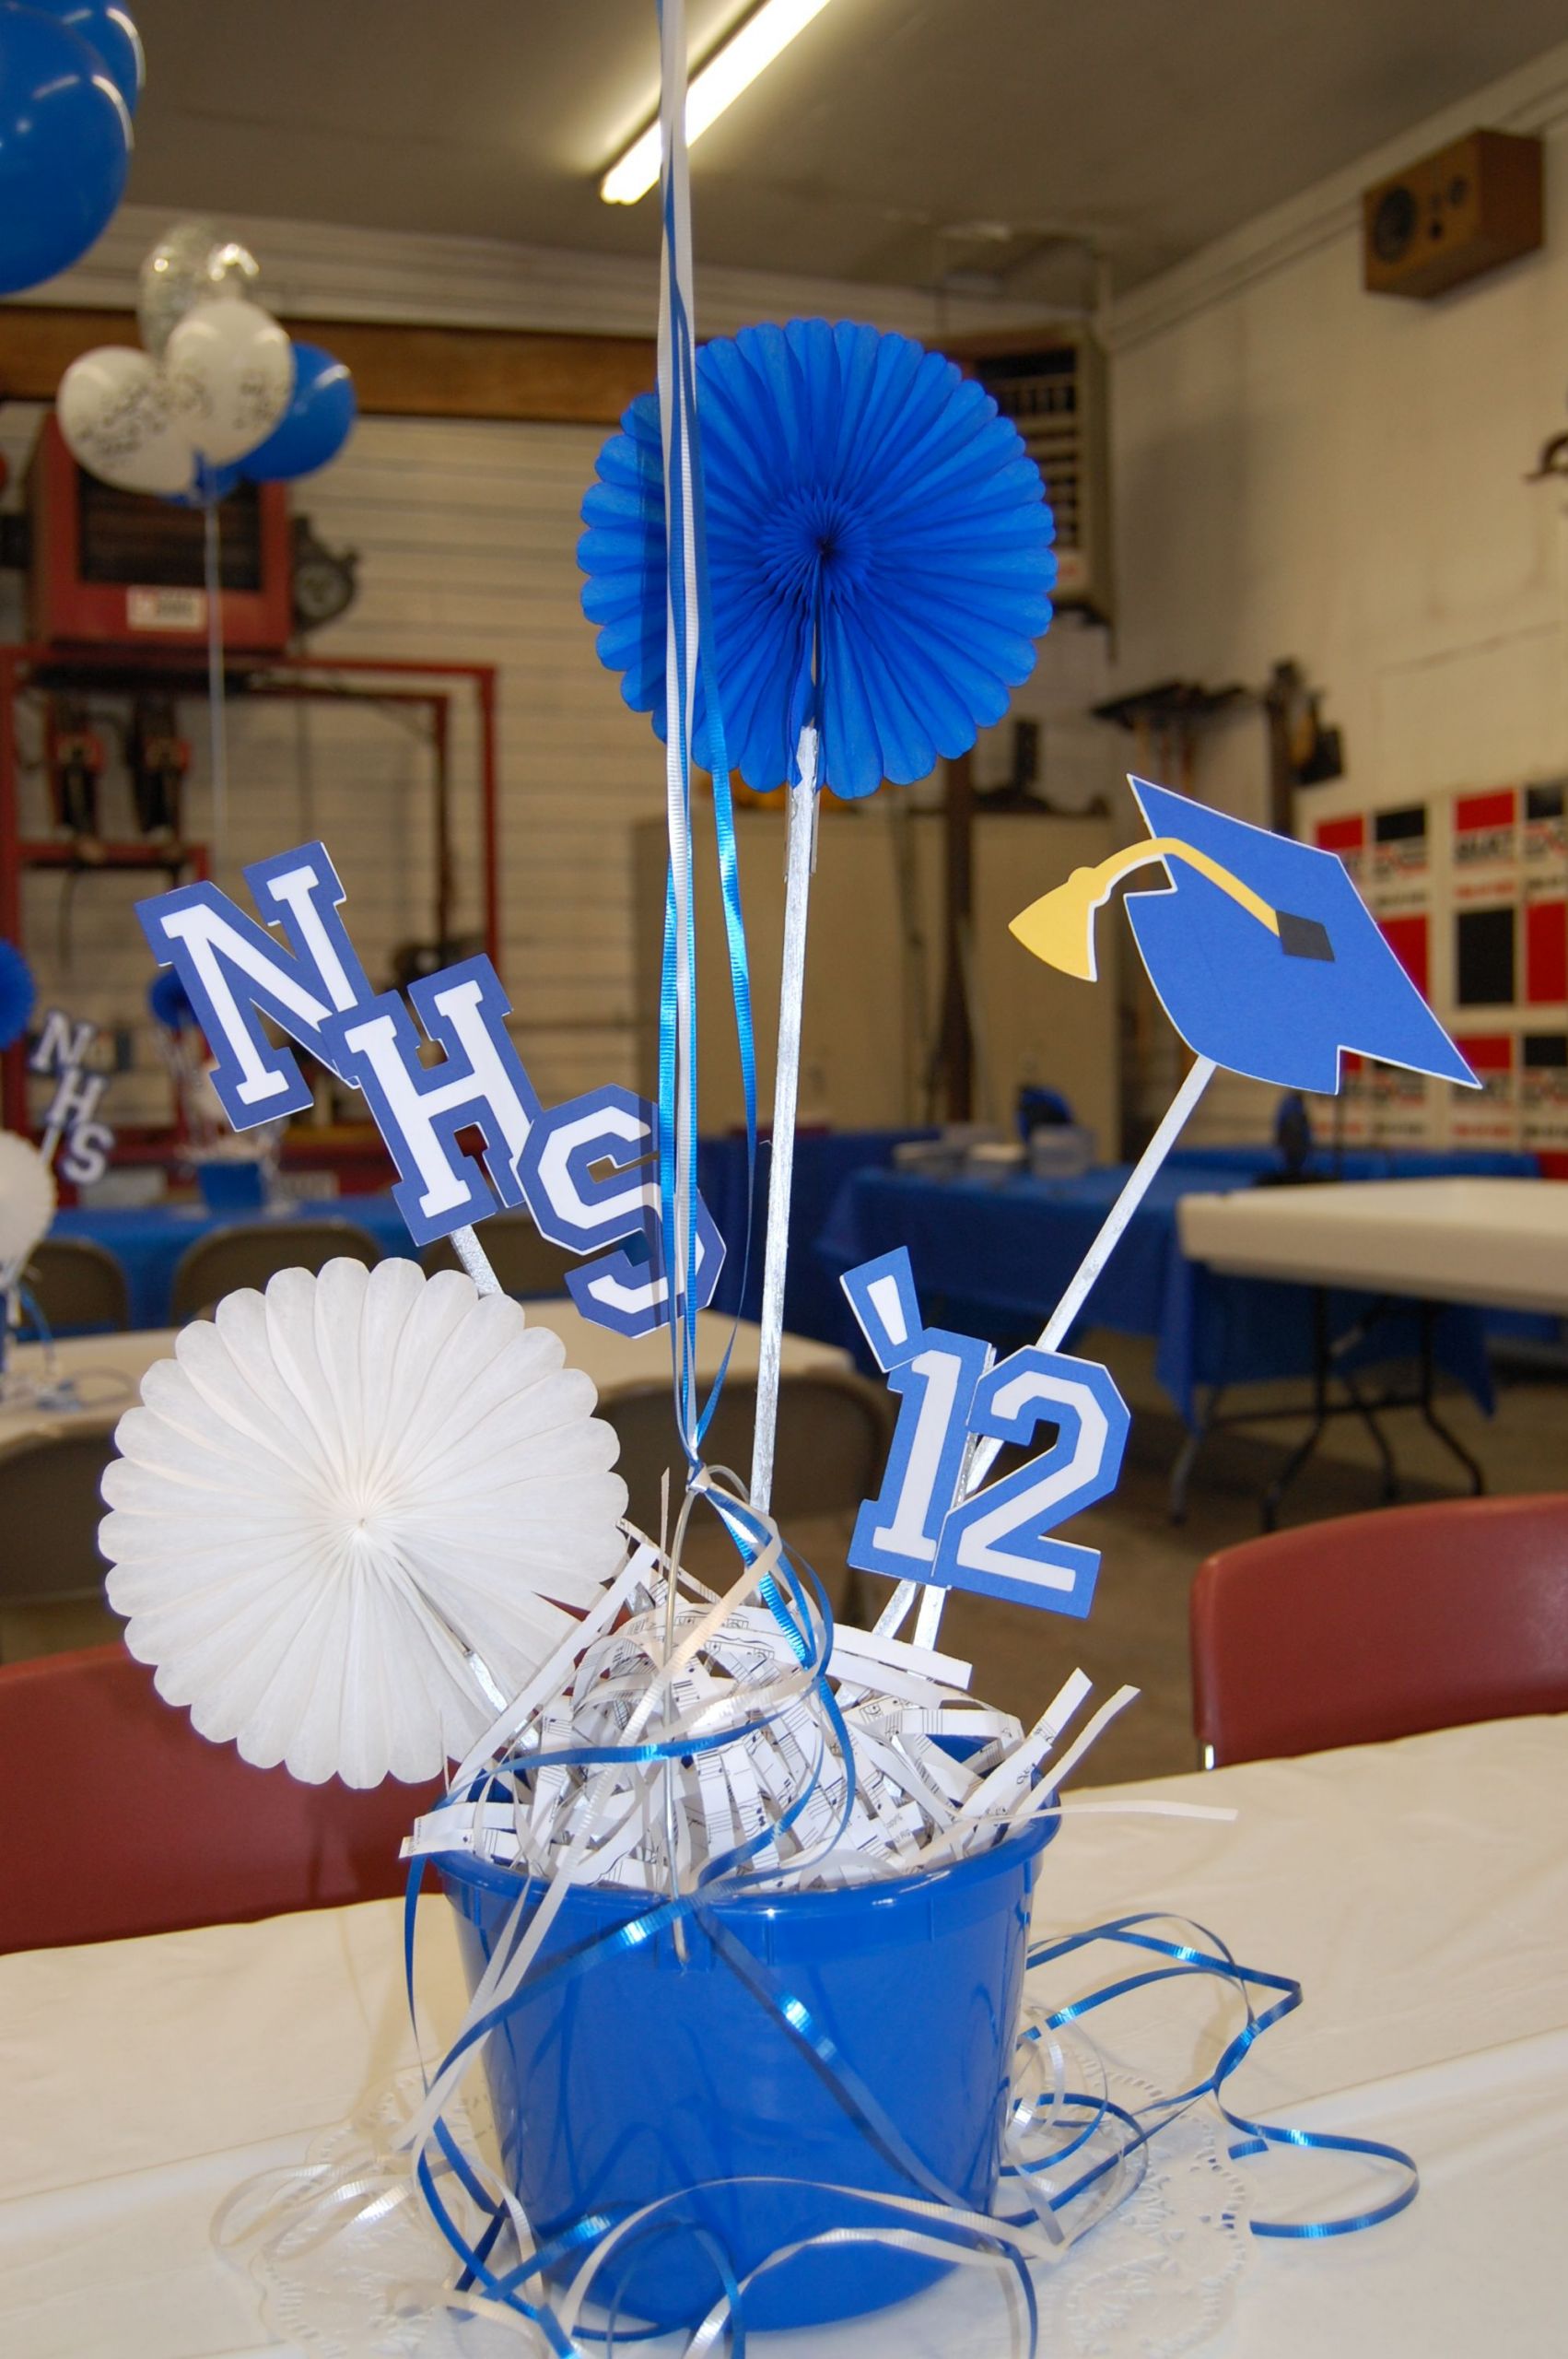 Ideas For Table Centerpieces For Graduation Party
 Easy centerpieces Grad time will be here soon